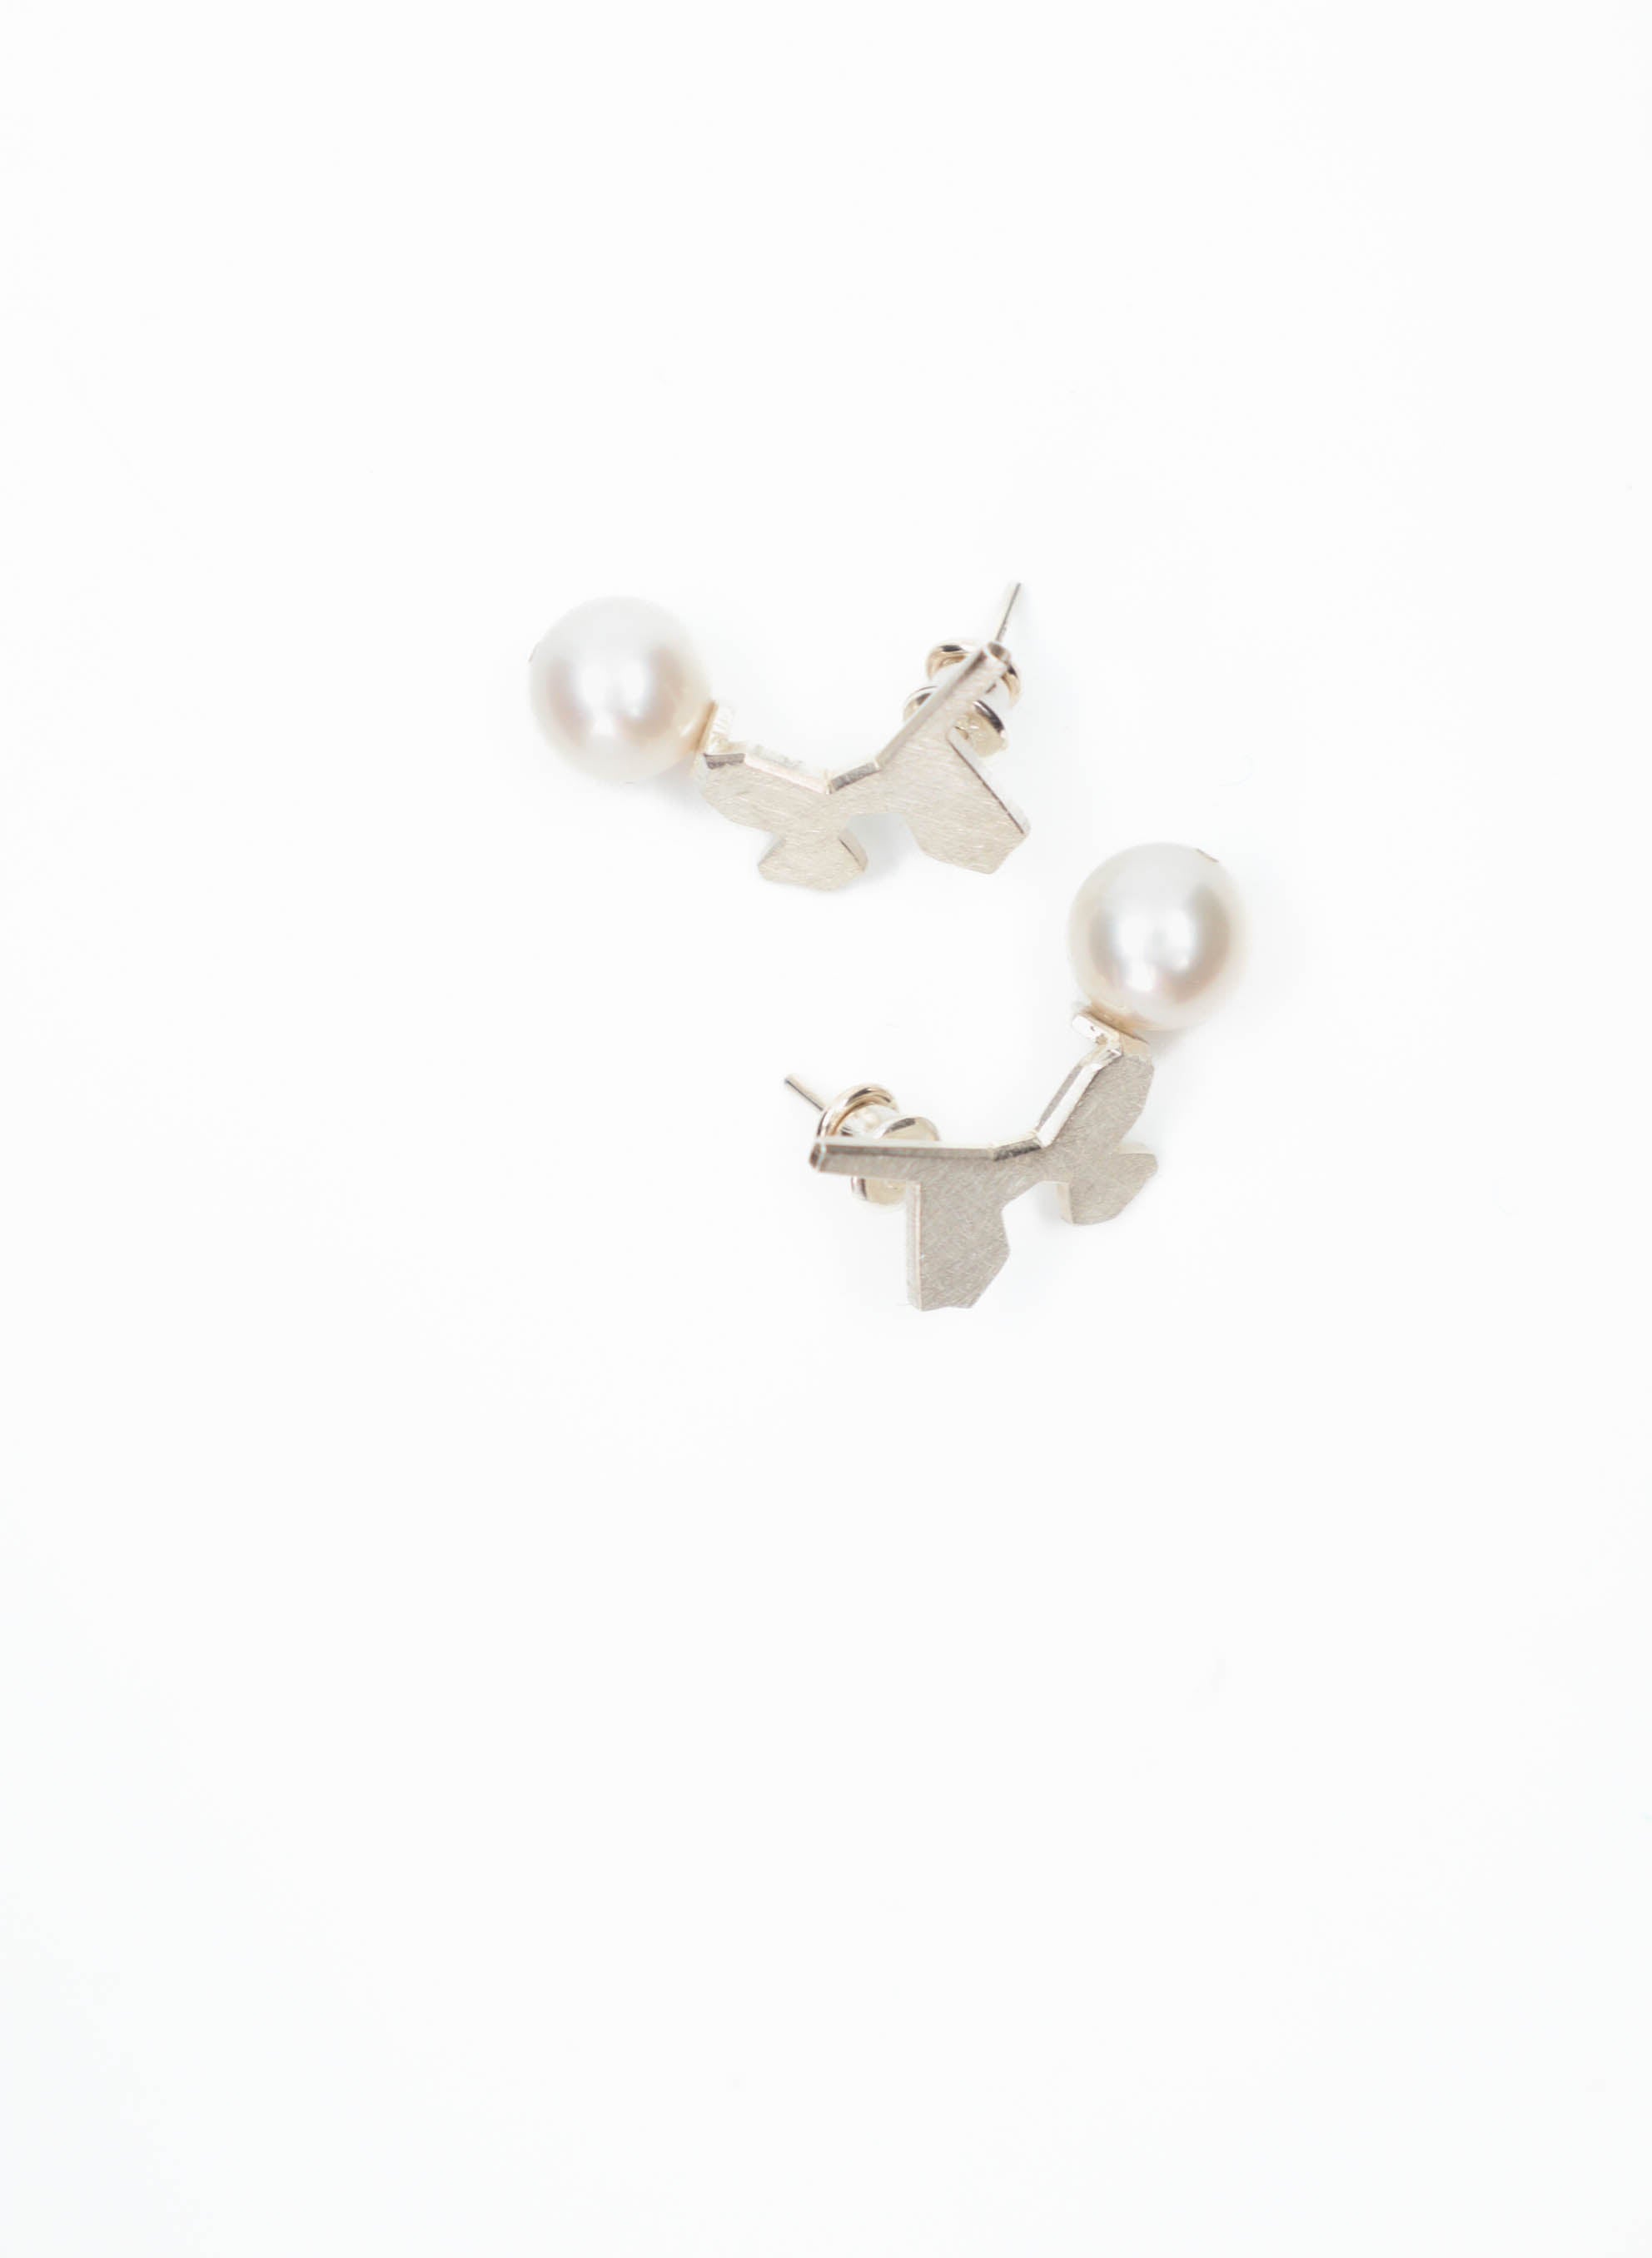 Leaf Structure Stud Earrings with Pearl